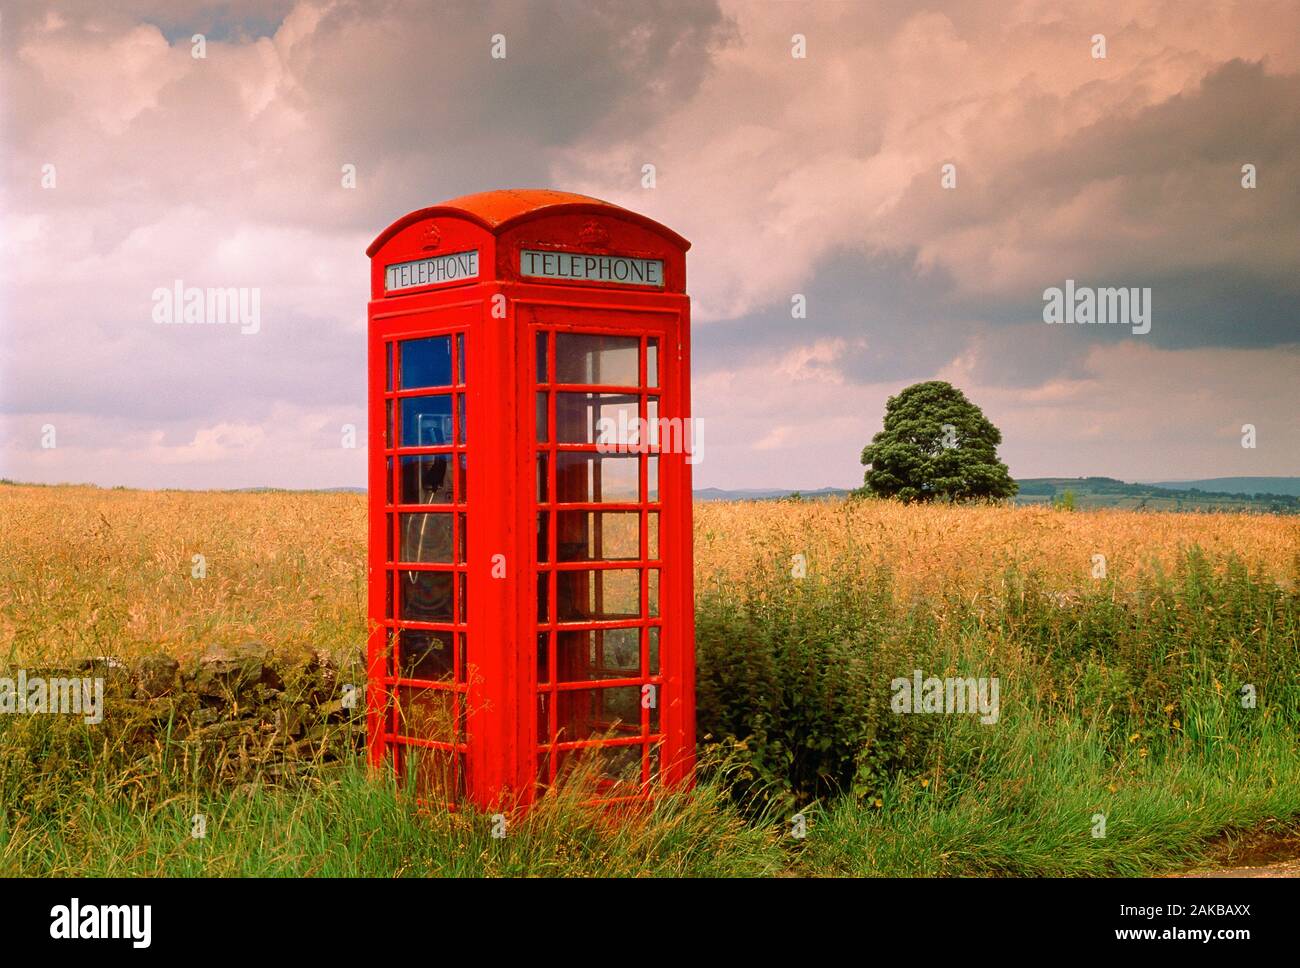 Red telephone booth in field, Derbyshire, England, UK Stock Photo